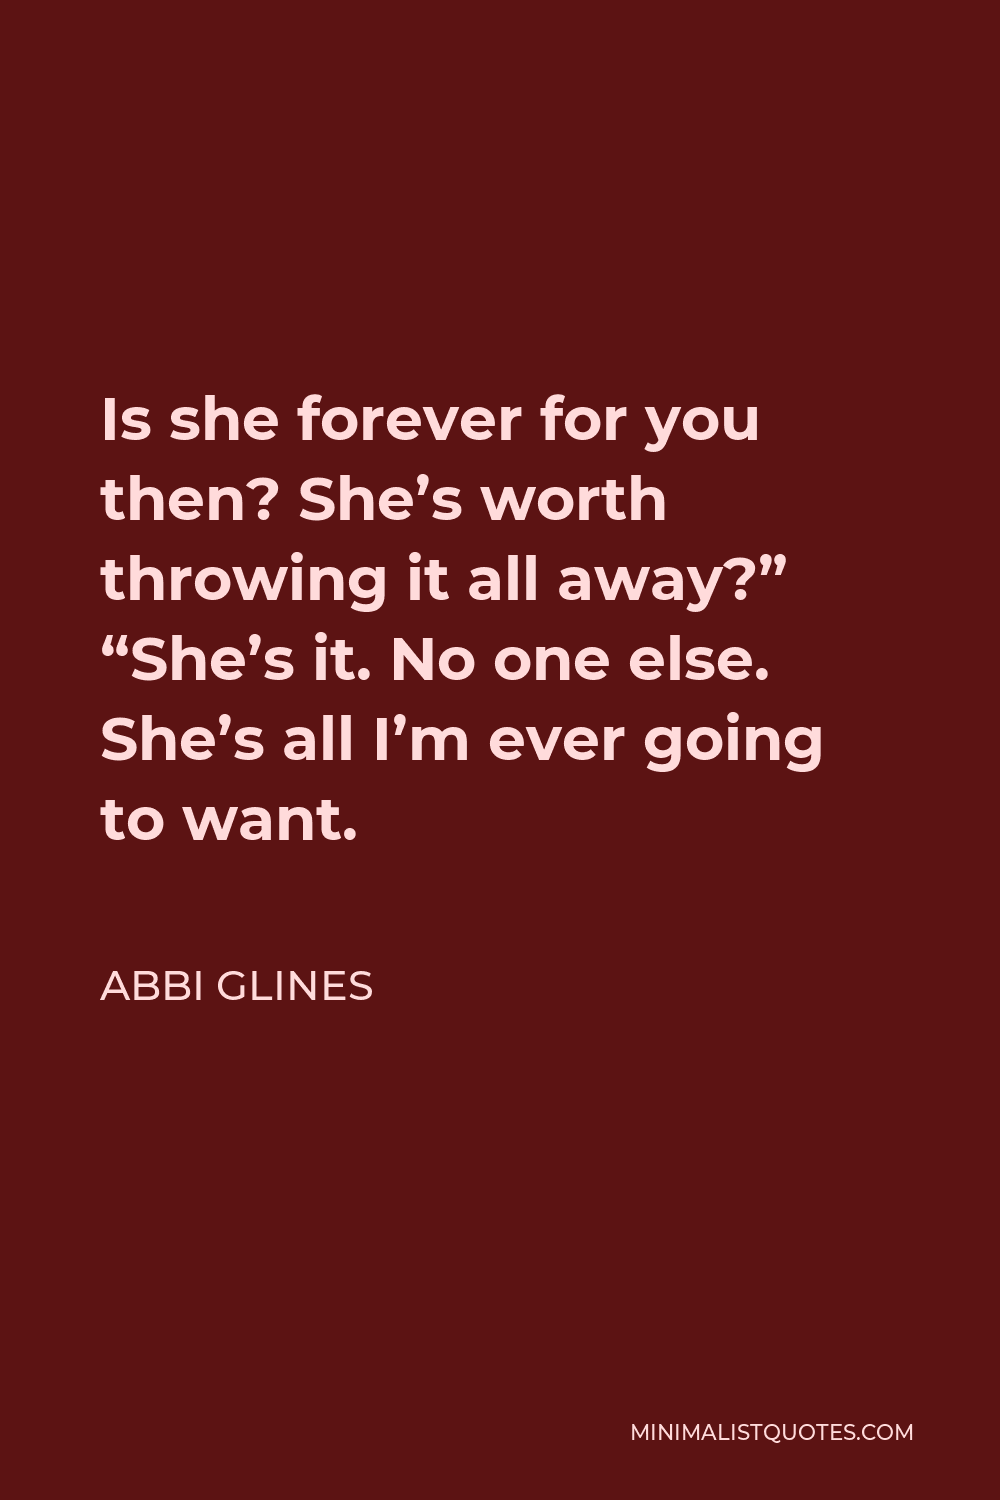 Abbi Glines Quote - Is she forever for you then? She’s worth throwing it all away?” “She’s it. No one else. She’s all I’m ever going to want.